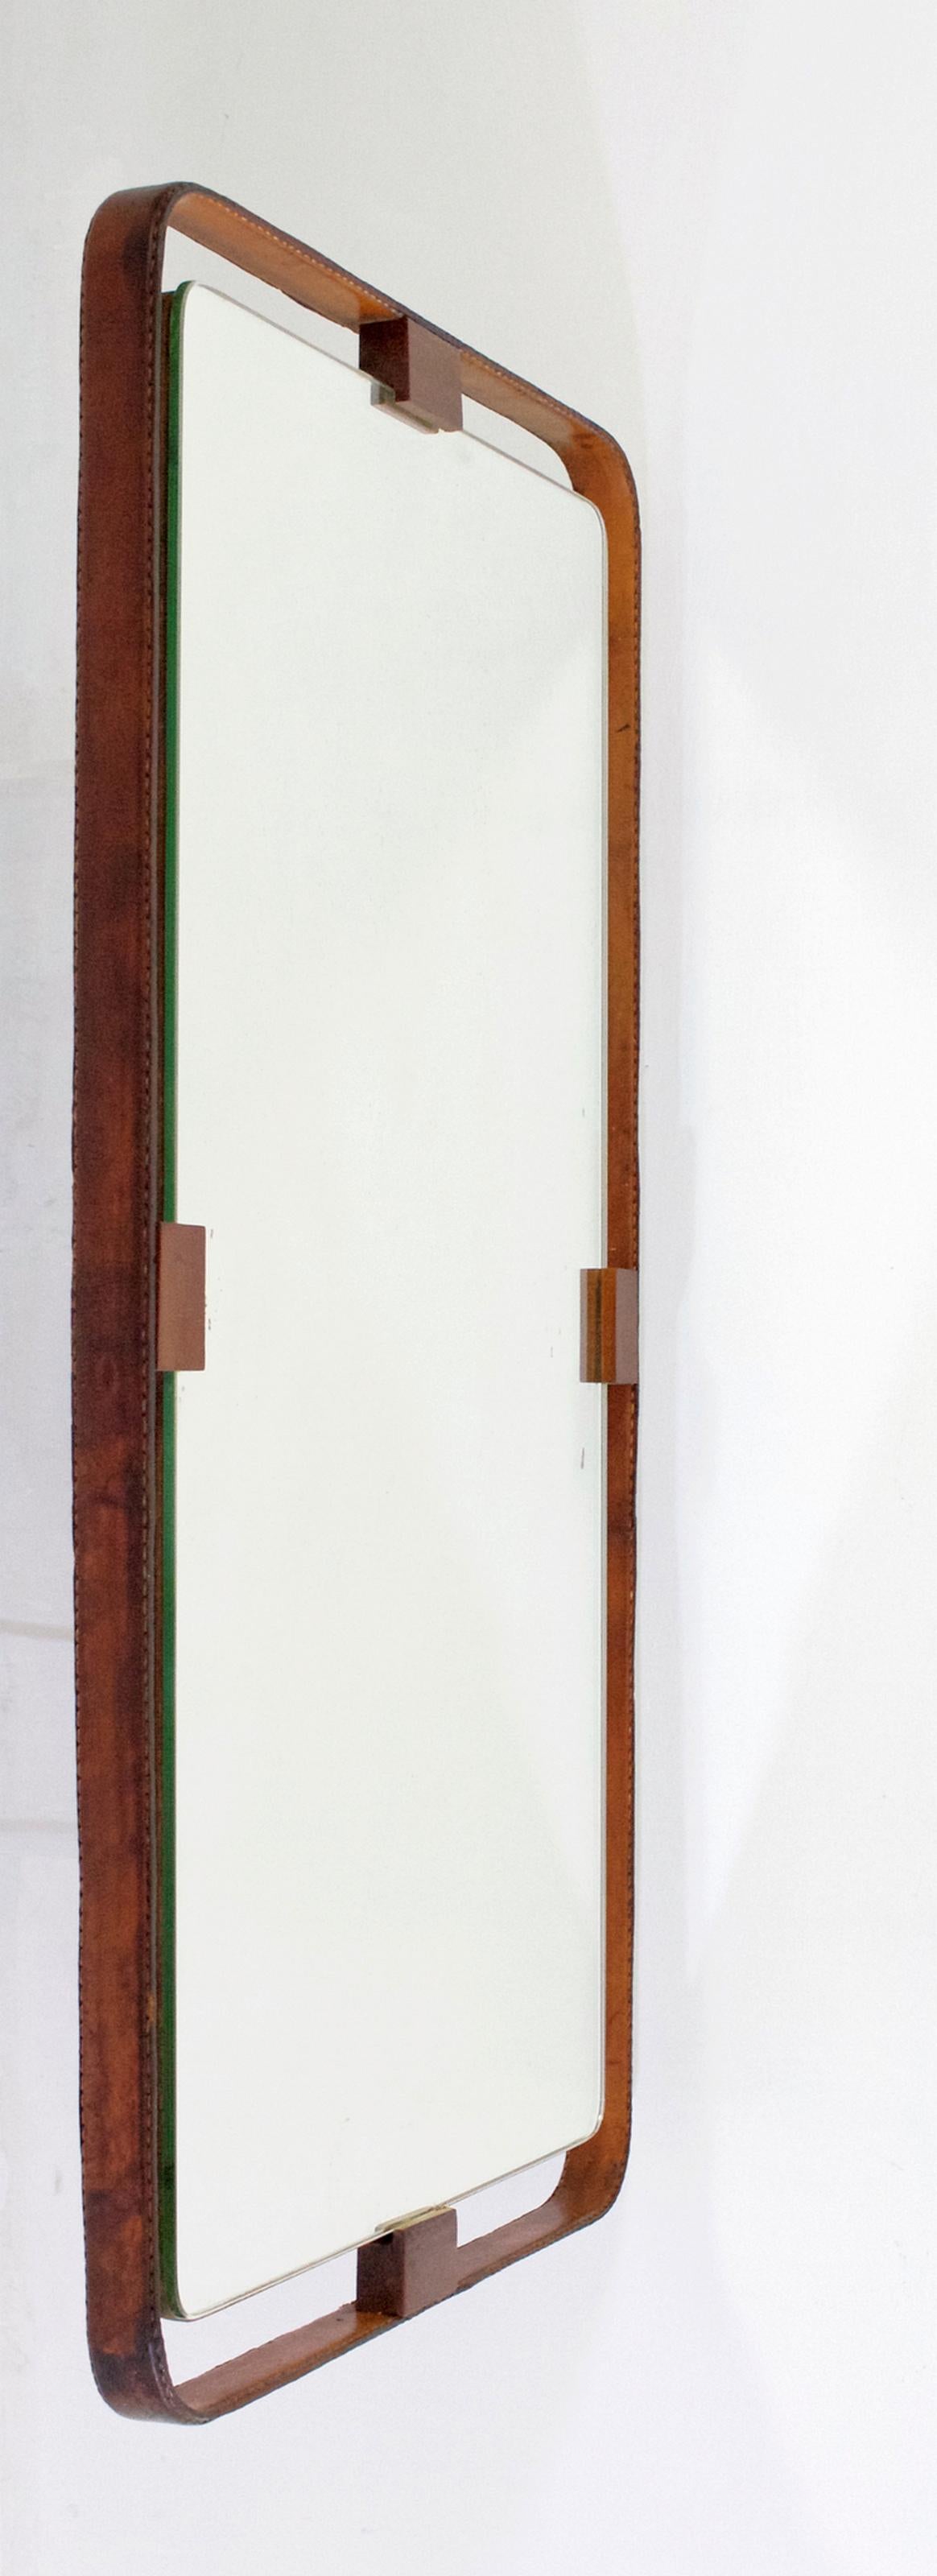 A handmade rectangular wall mirror in a masculine and clean design with a leather frame attached with teak wood to the glass. In very nice vintage condition.